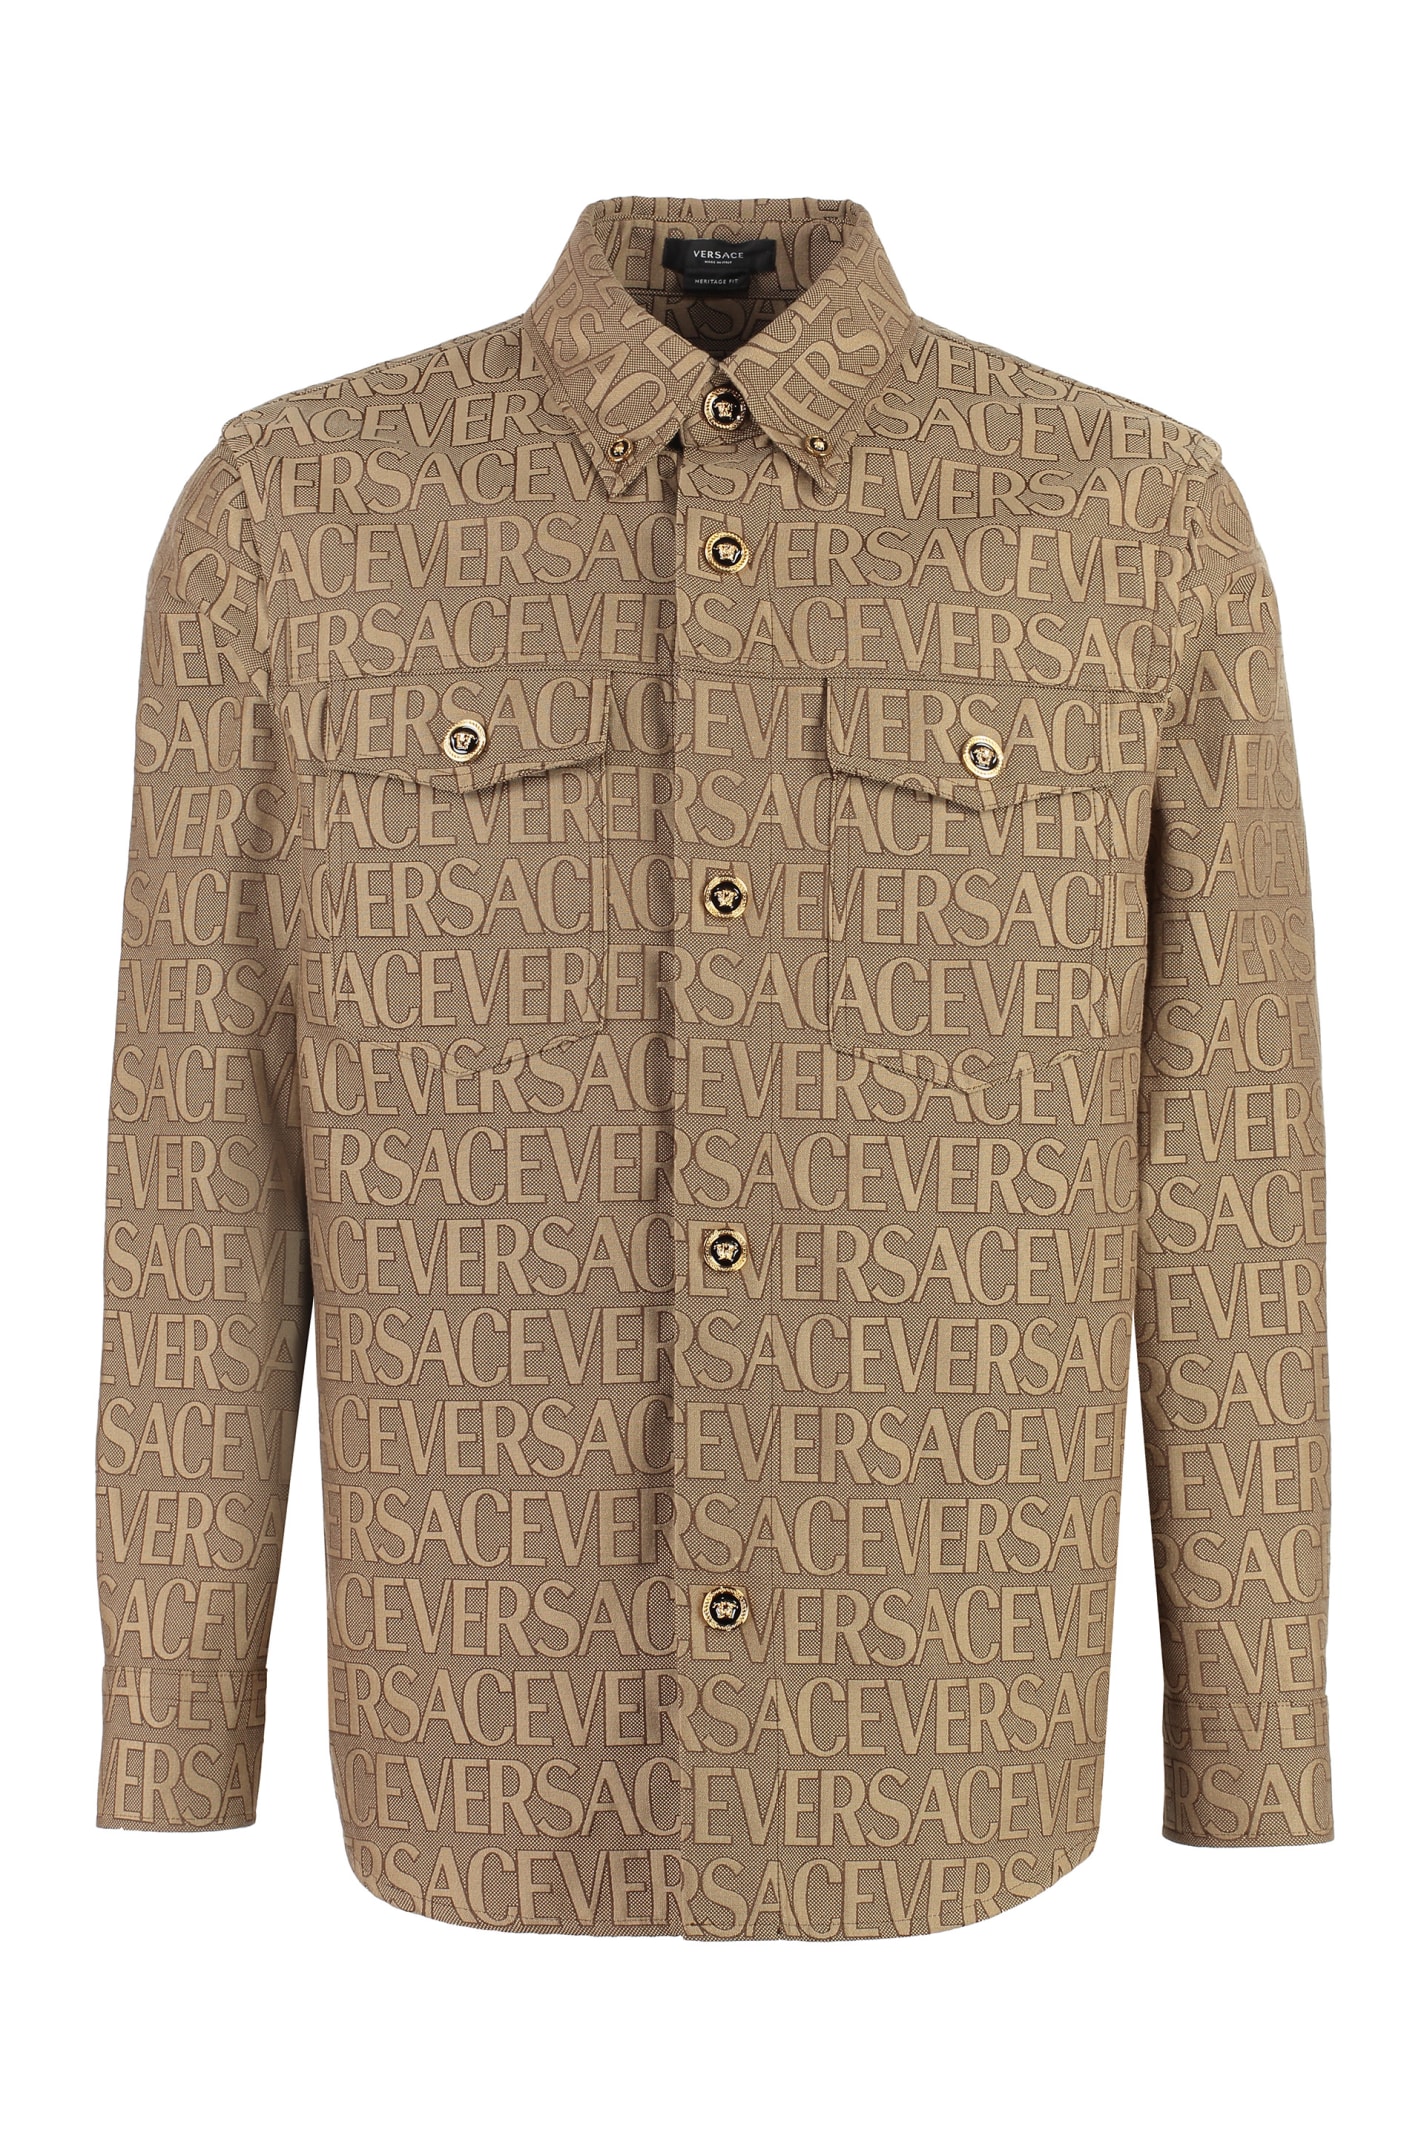 Versace Jacquard Fabric Overshirt With Logo In Brown